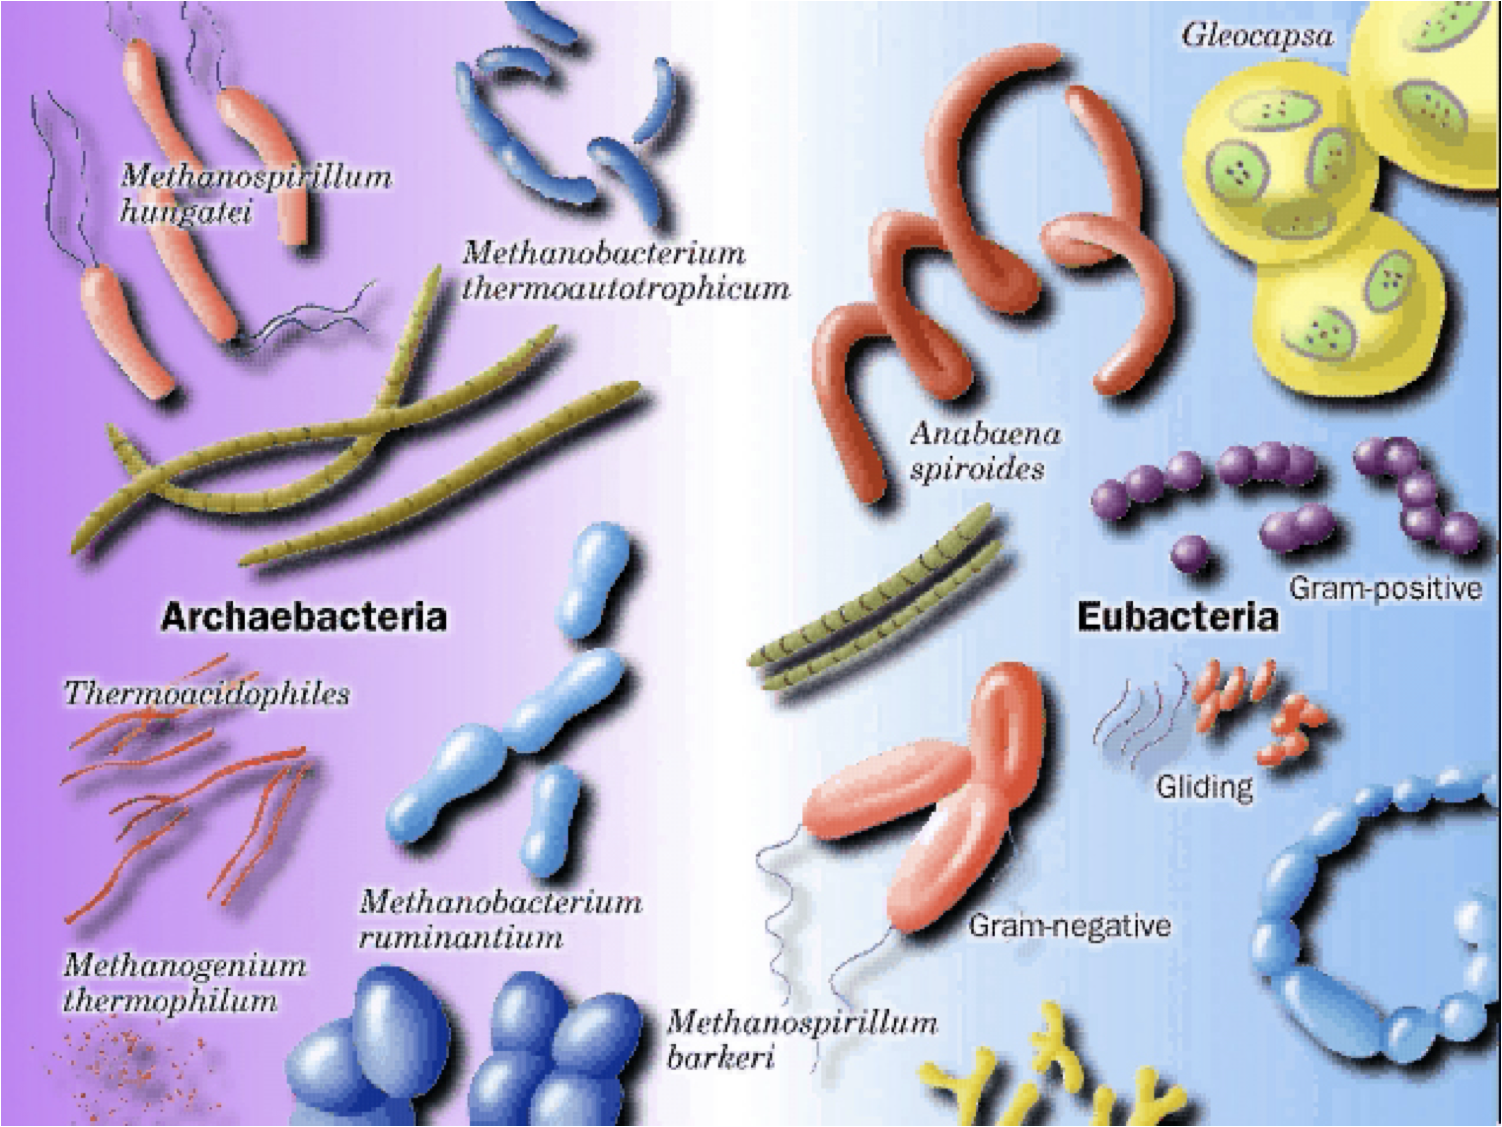 Archaebacteria text images